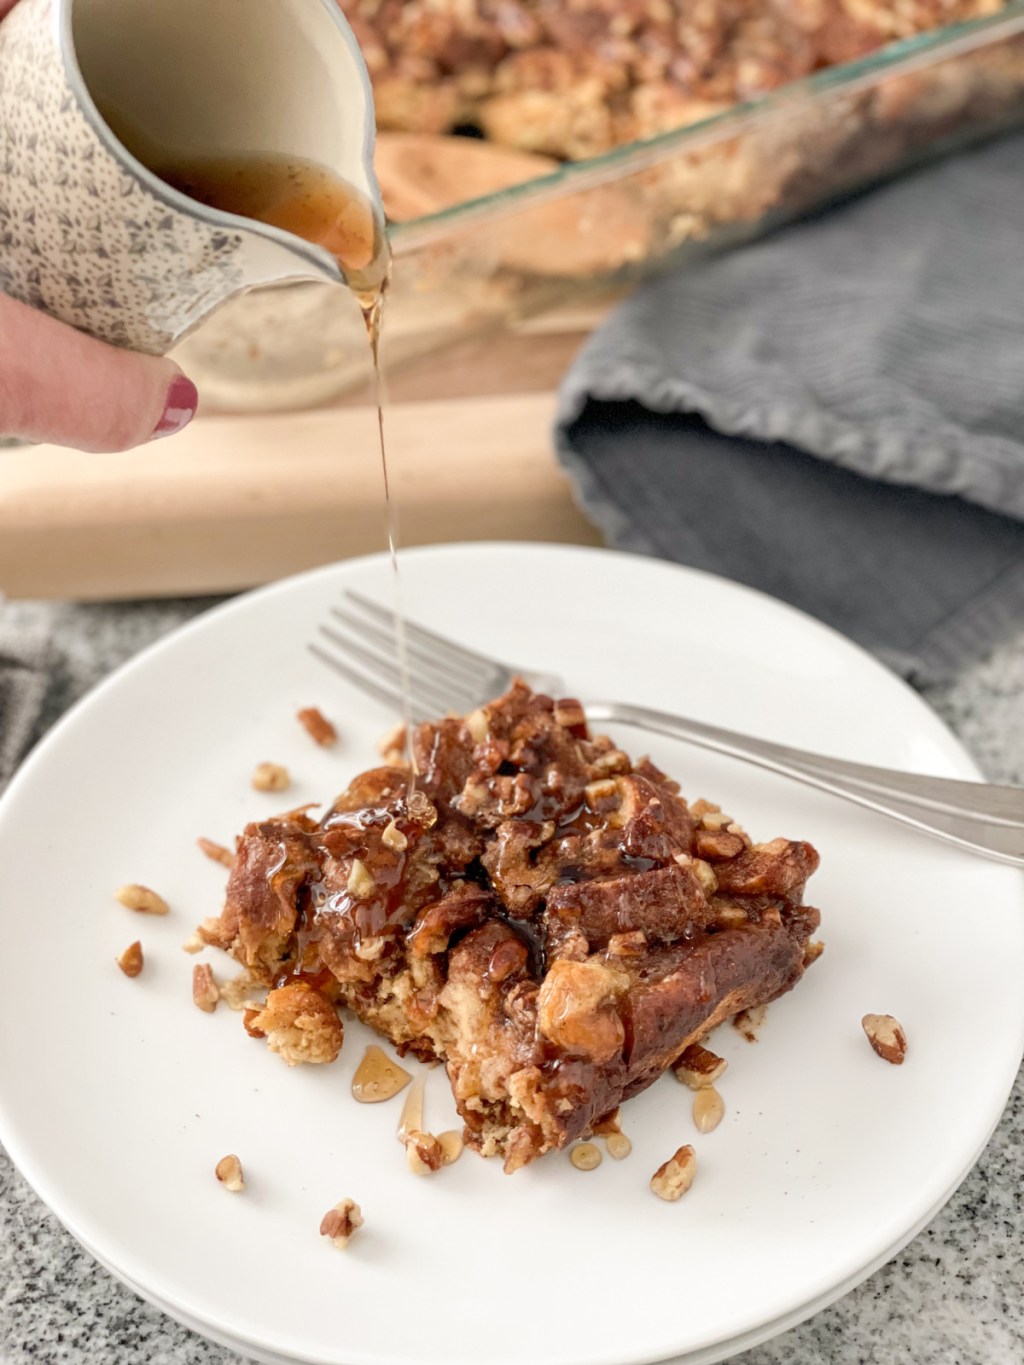 pouring syrup over Keto French Toast Casserole made with Hero seeded bread